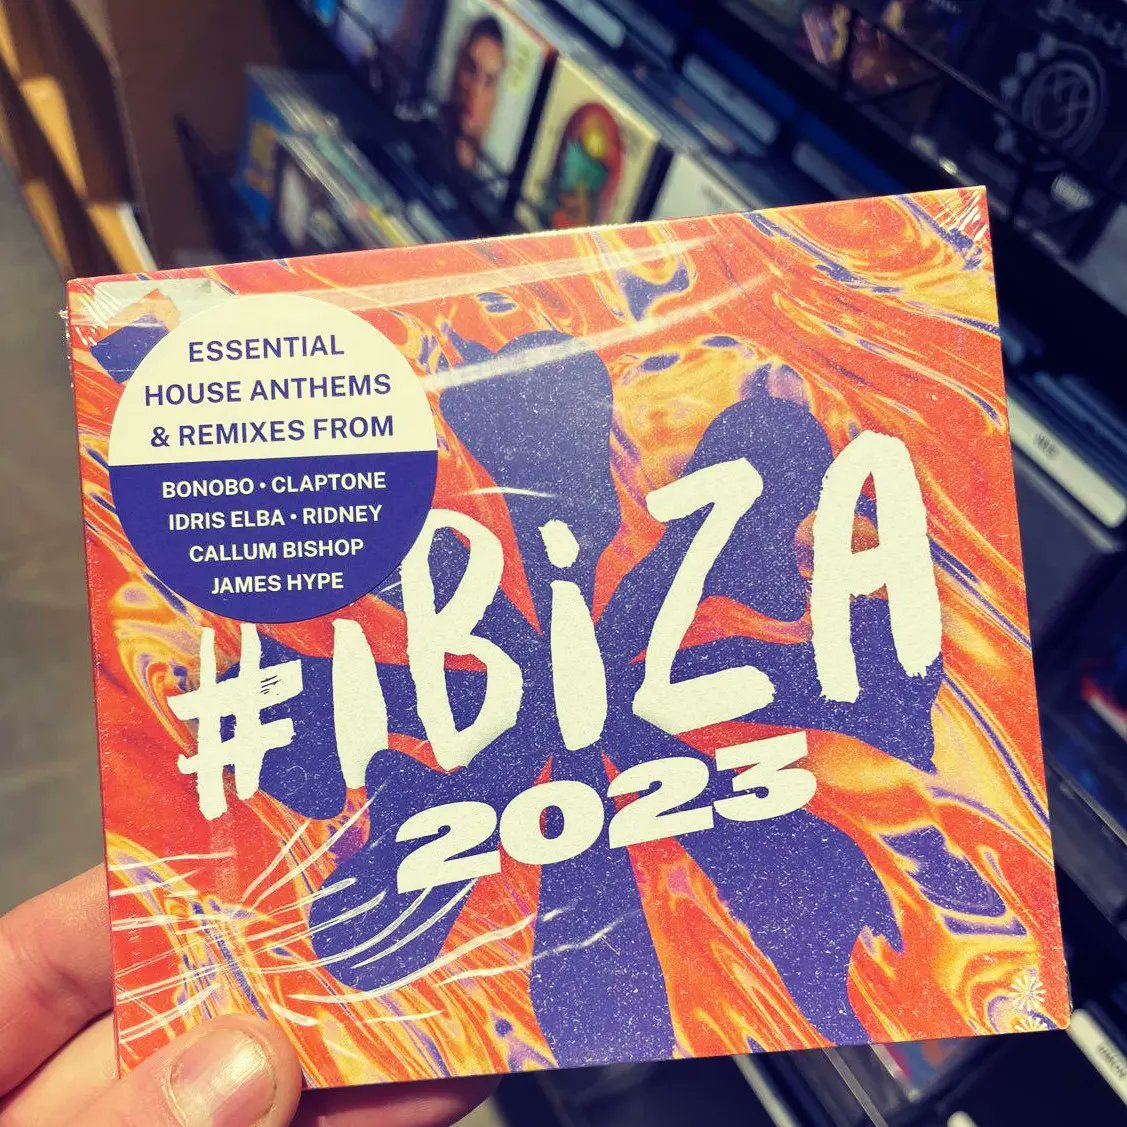 Have you grabbed your copy? 💿 slinky.to/ibiza23 #ibiza2023